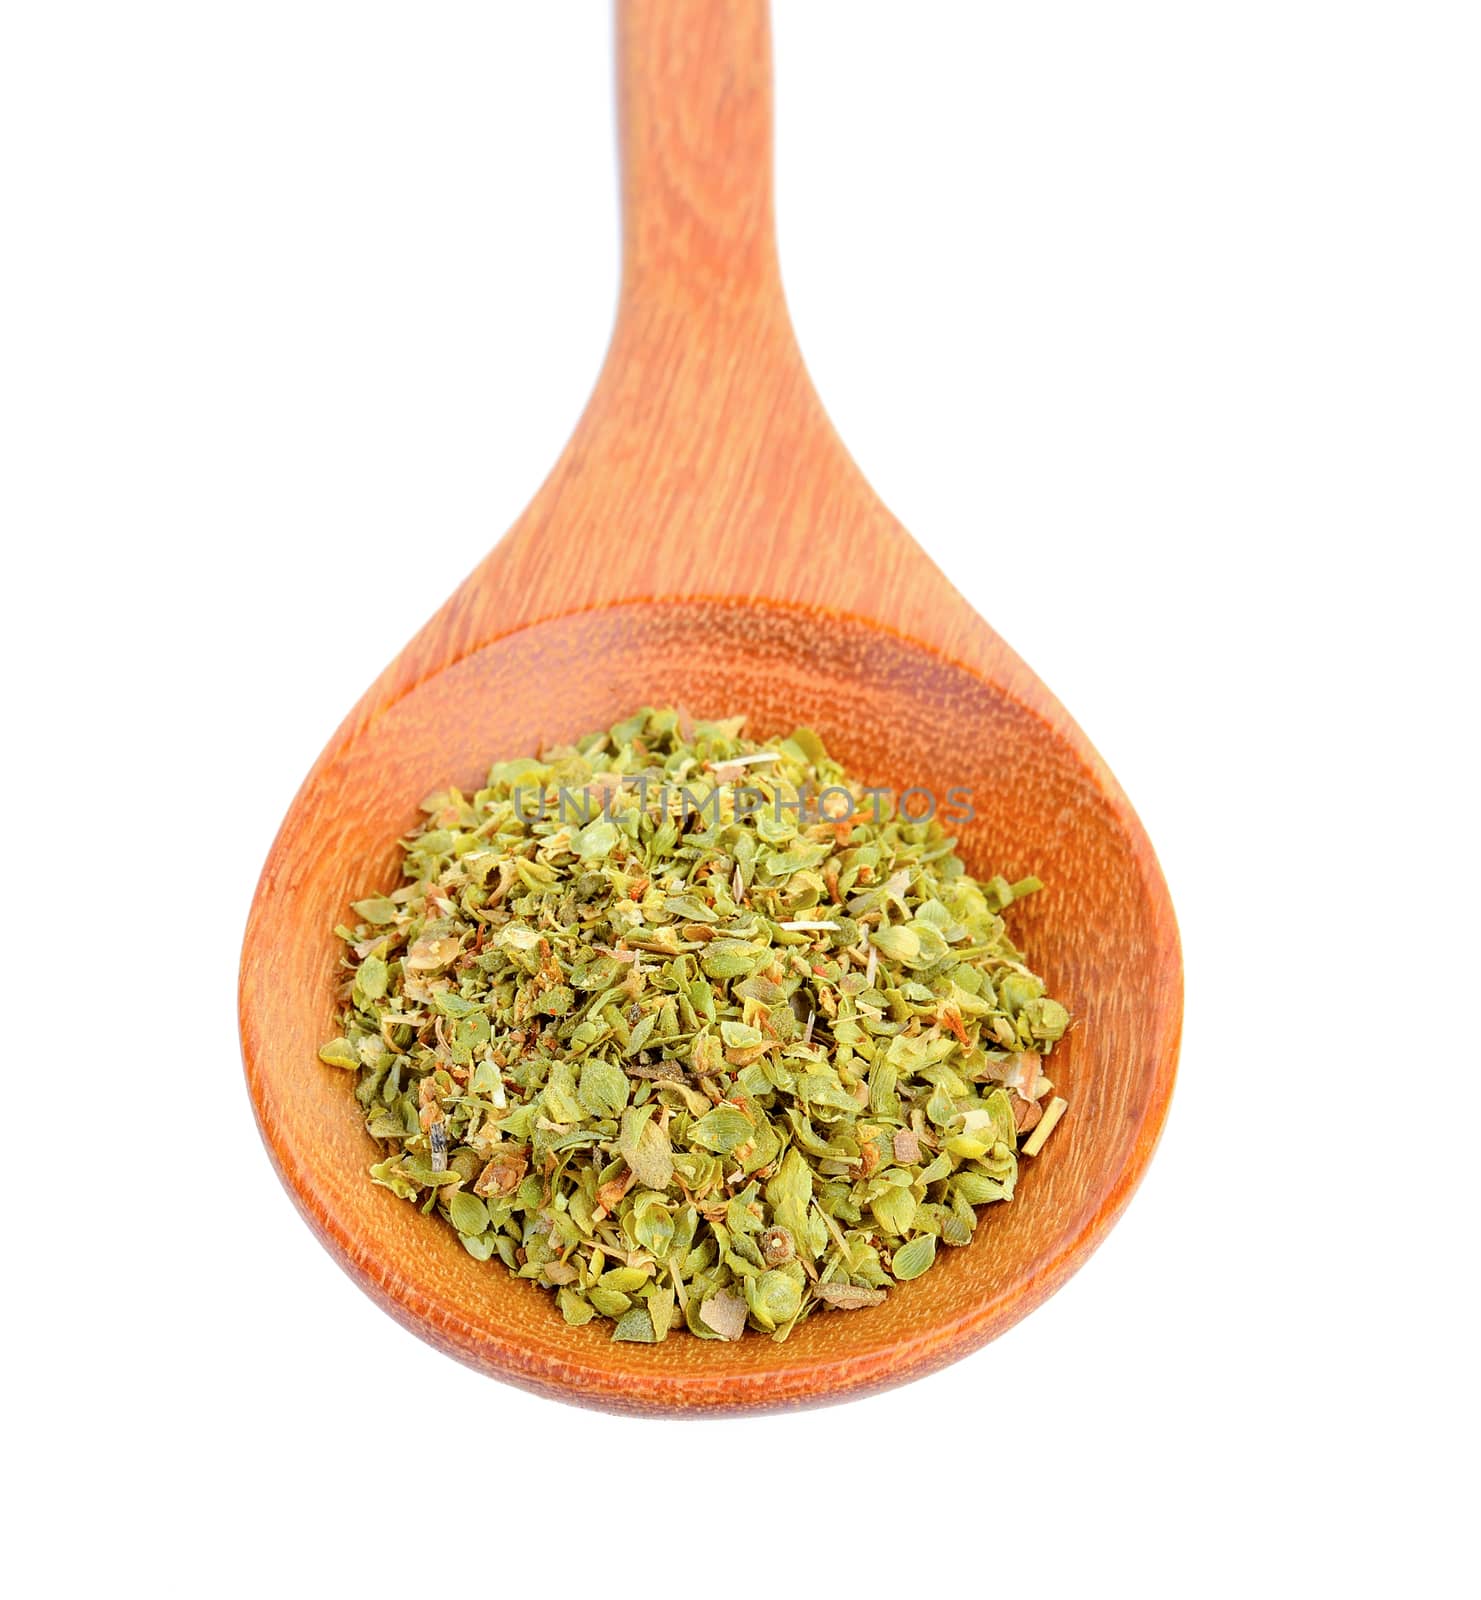 Dried Oregano in wood spoon on white background